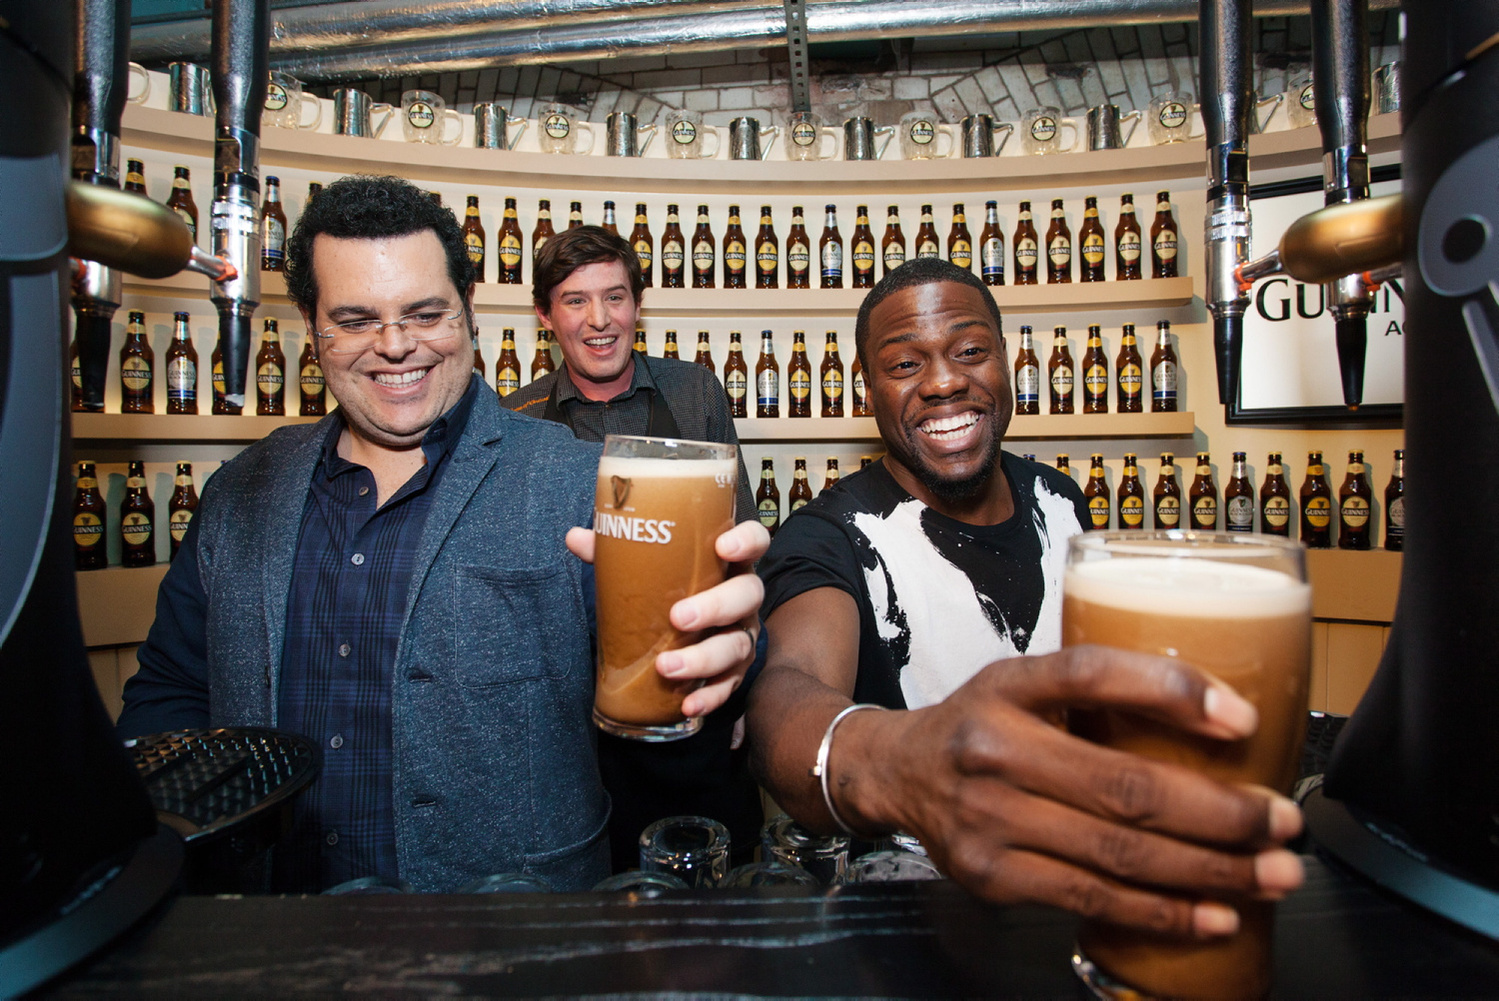 Press PR photo of Kevin Hart and Josh Gad at The Wedding Ringer photocall visiting The Guinness Storehouse in Dublin and pulling pints of Guinness. Professional photographer Dublin